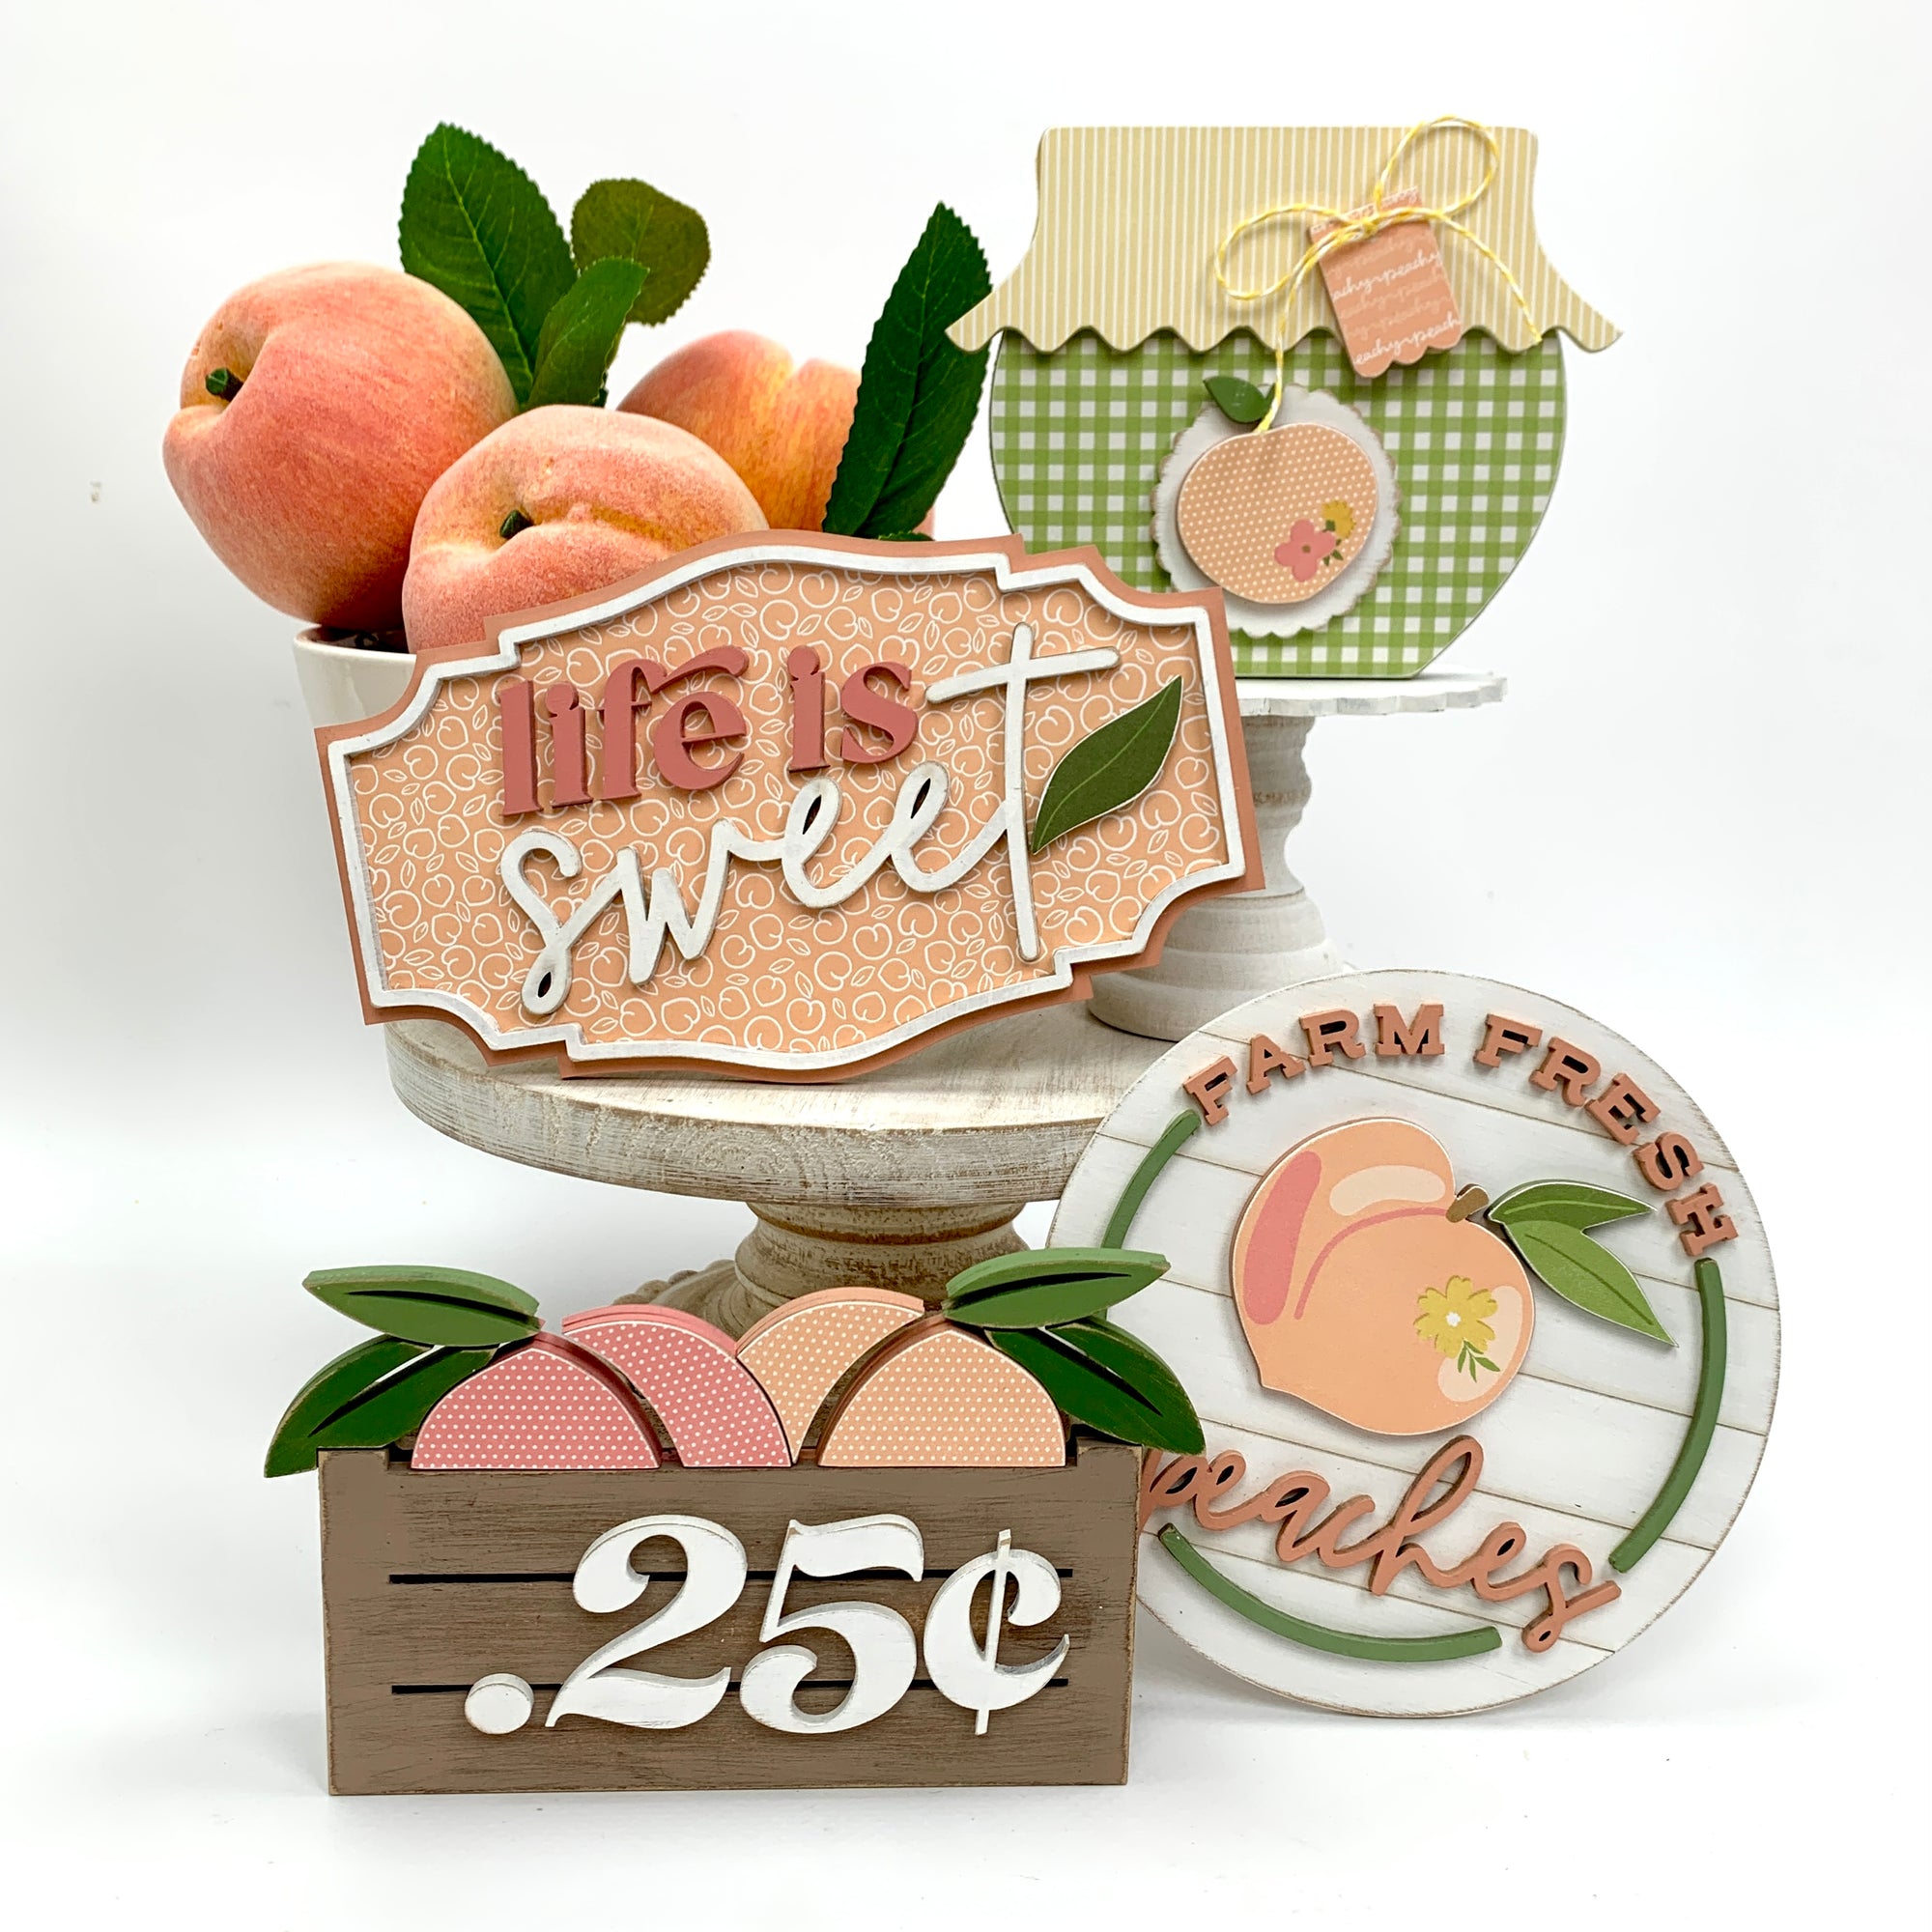 Peach jam jar, crate with peaches, life is sweet sign, and a fresh peaches shiplap sign wood decor craft kit for tiered tray and home decorations. 